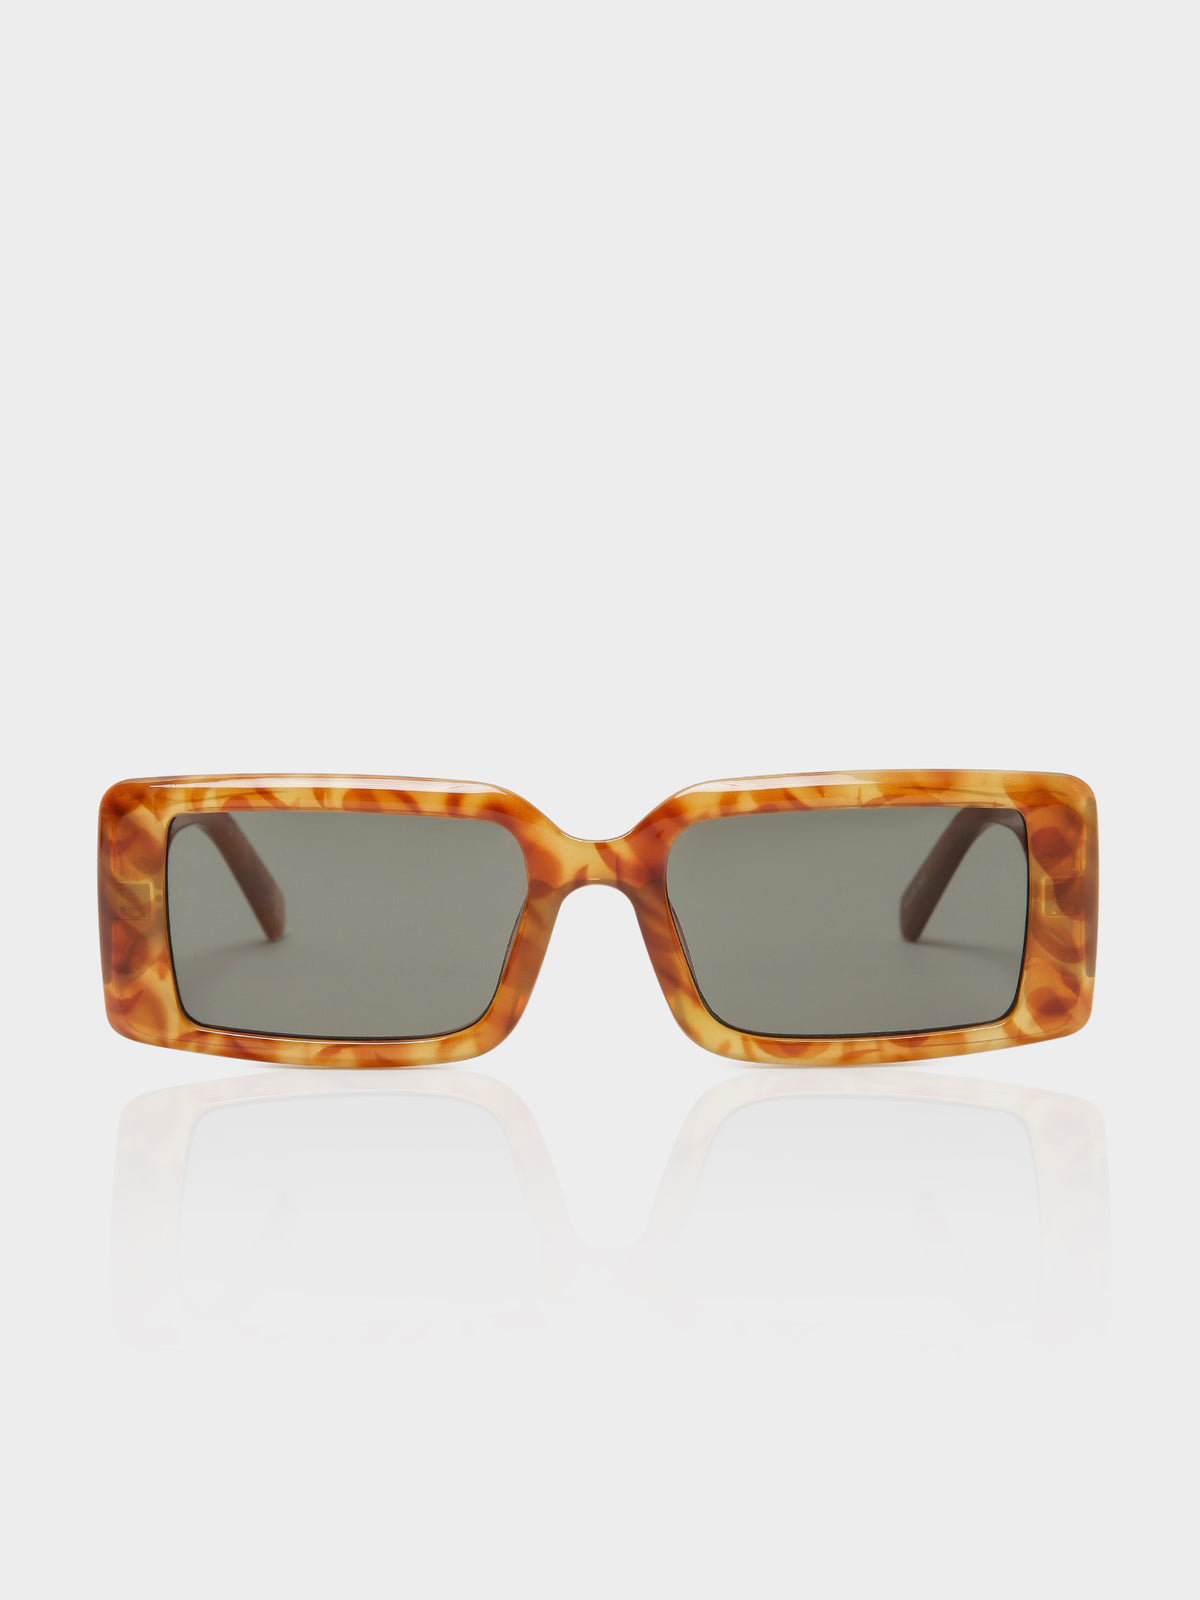 The Impeccable Alt Fit Sunglasses in Tortoiseshell